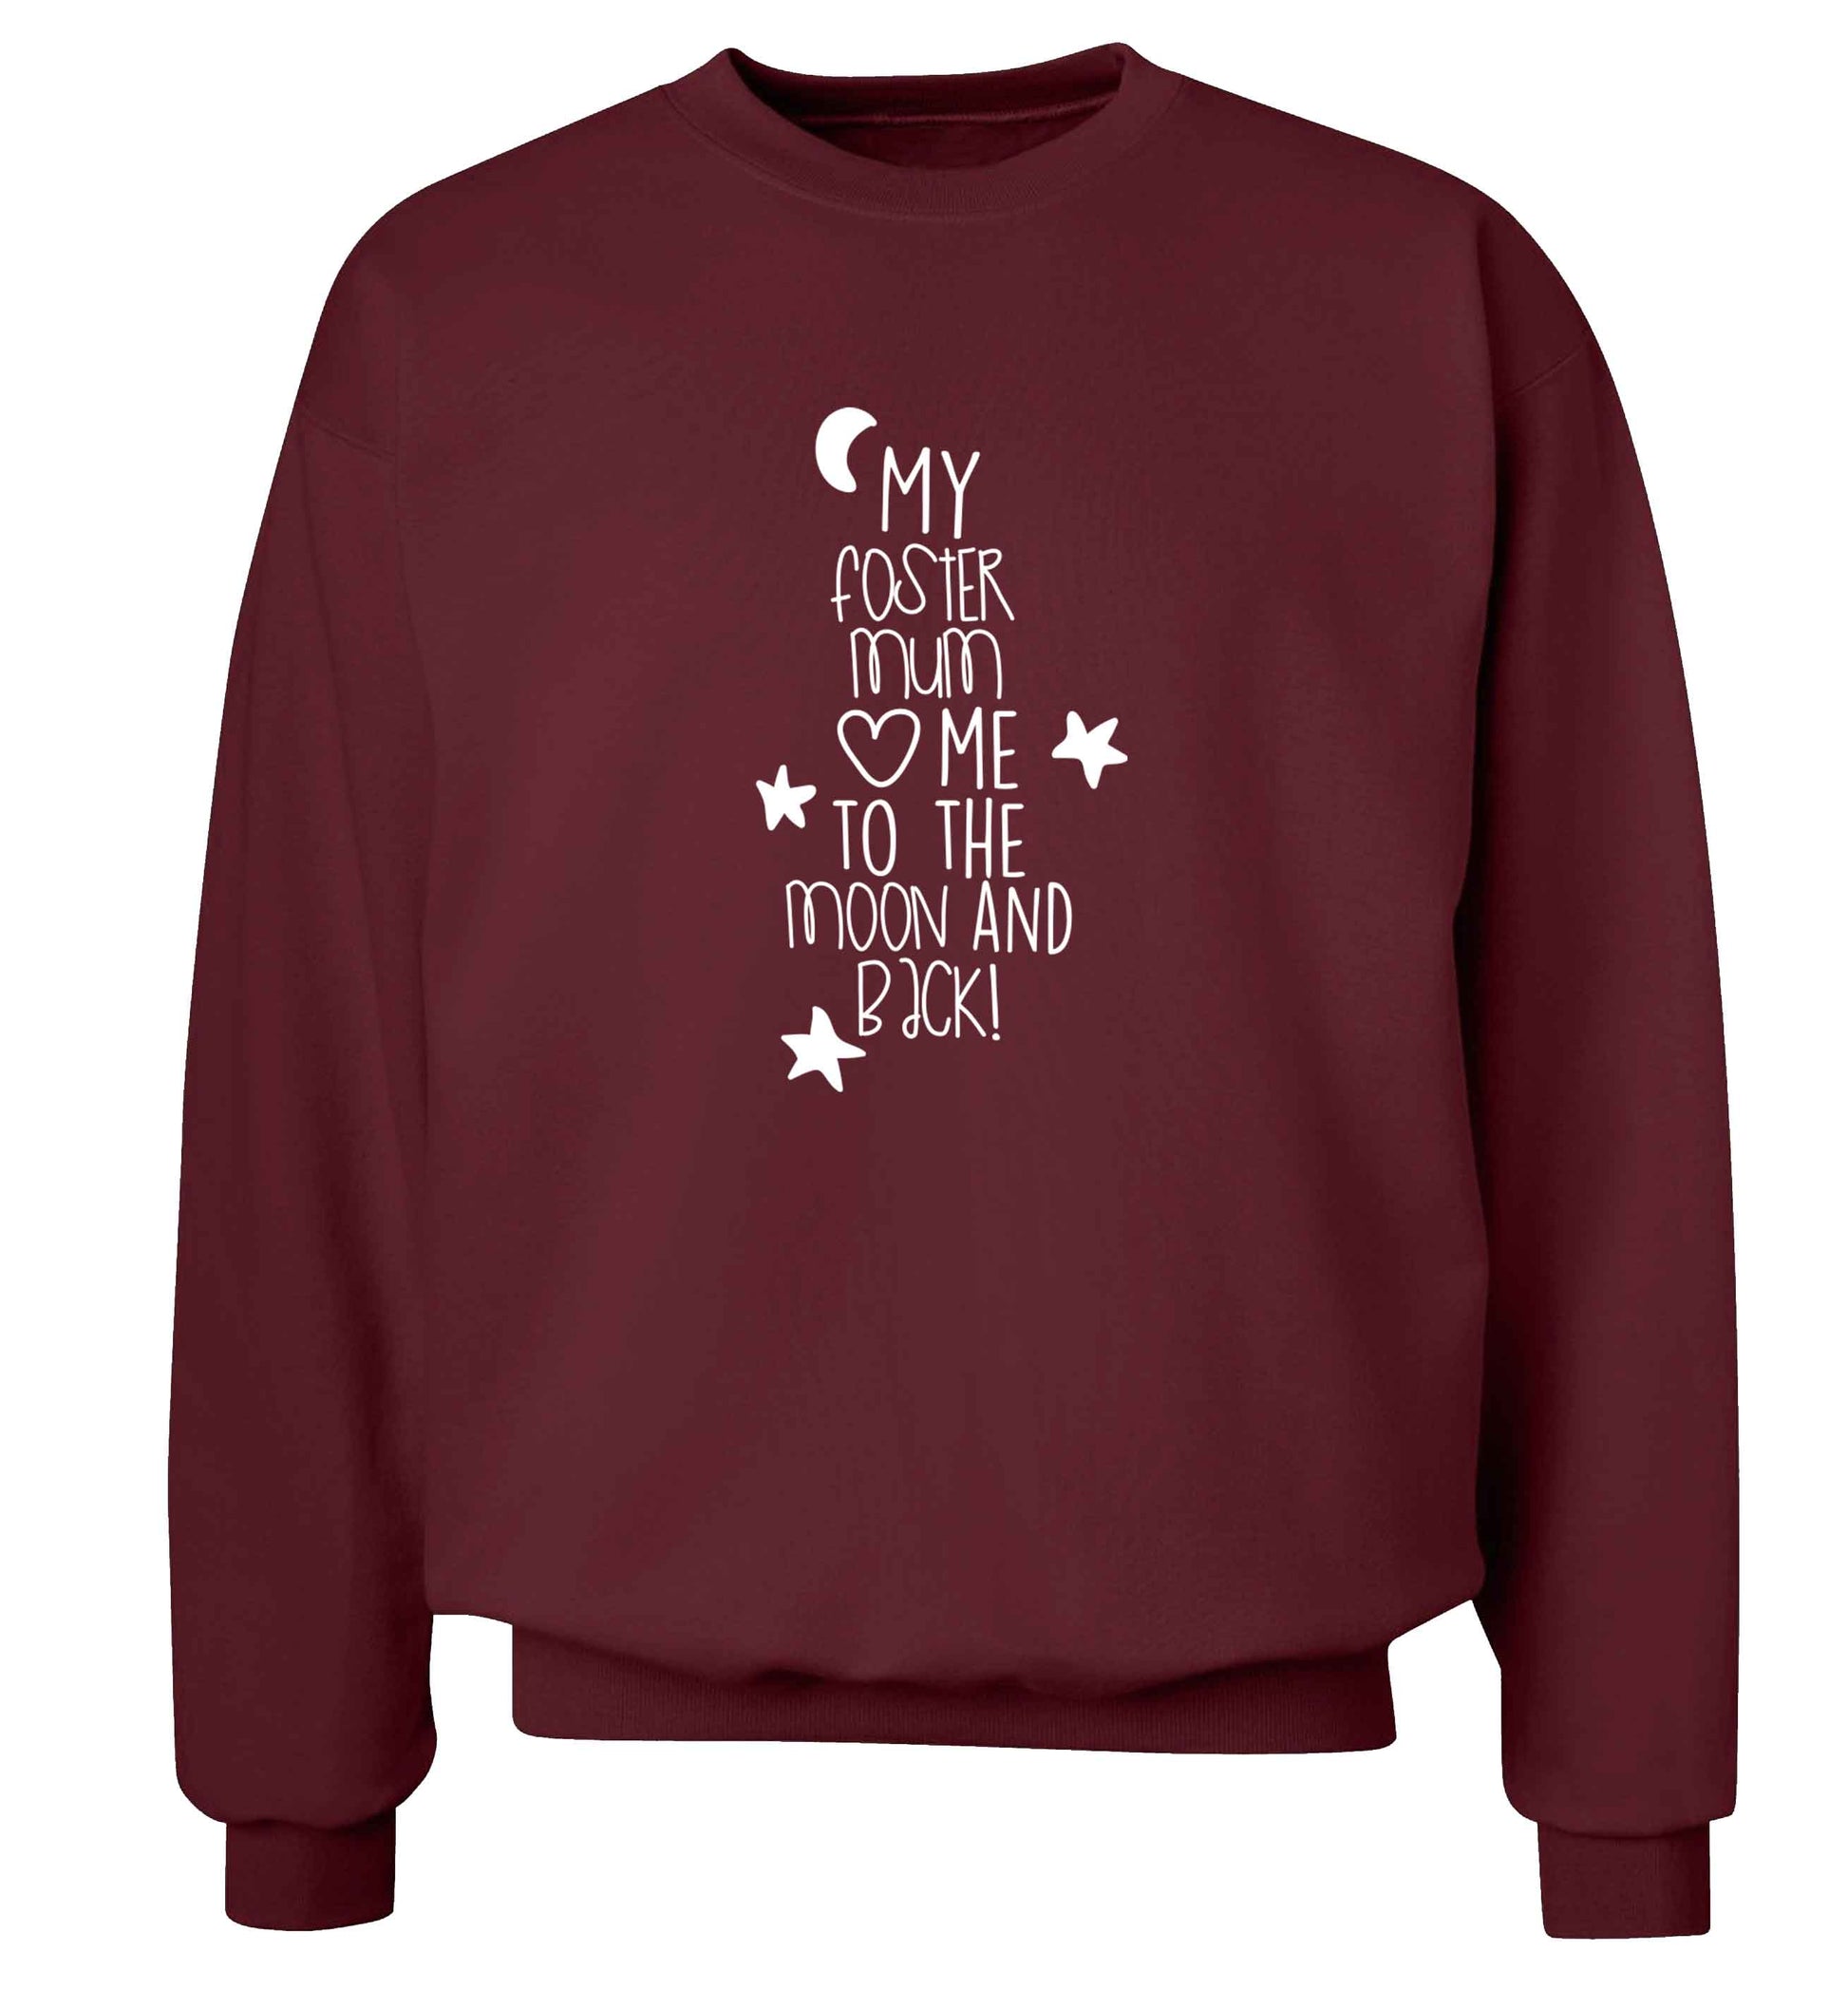 My foster mum loves me to the moon and back adult's unisex maroon sweater 2XL